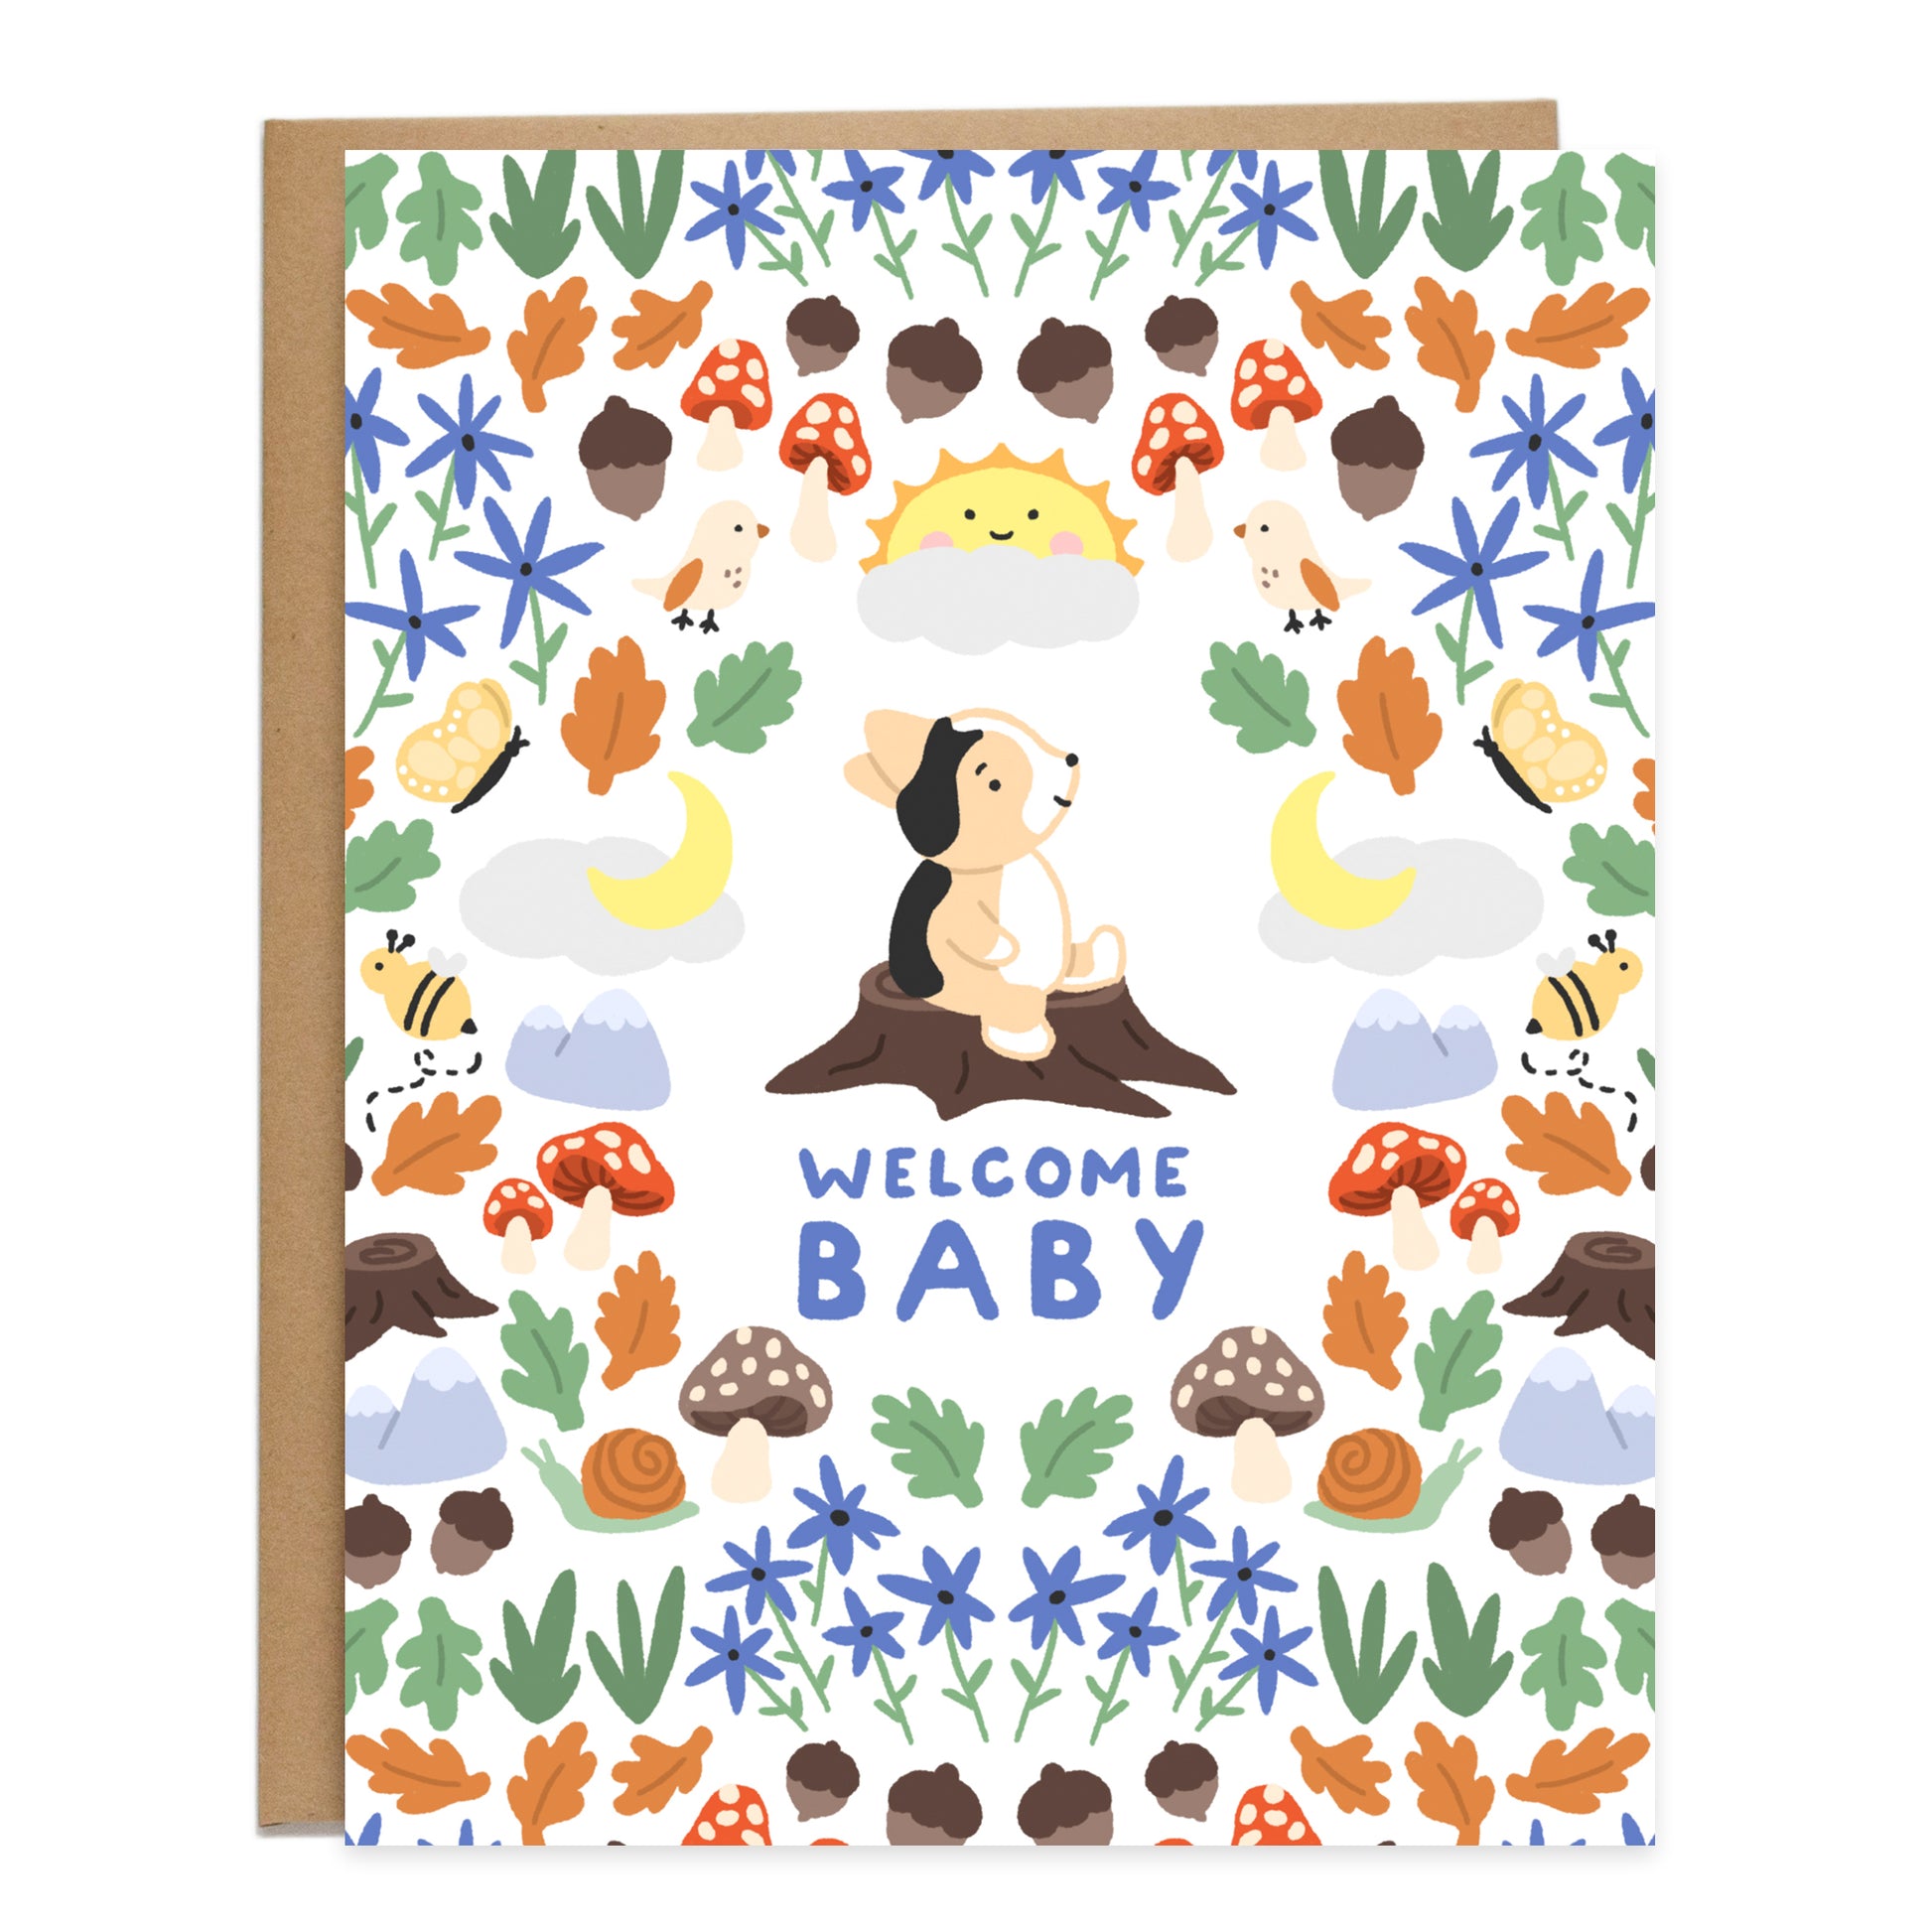 A baby tricolor corgi sitting on a tree stump looking up surrounded by a pattern of woodland themes like acorns, leaves, mushrooms, mountains, bees, birds, snails, and blue wildflowers